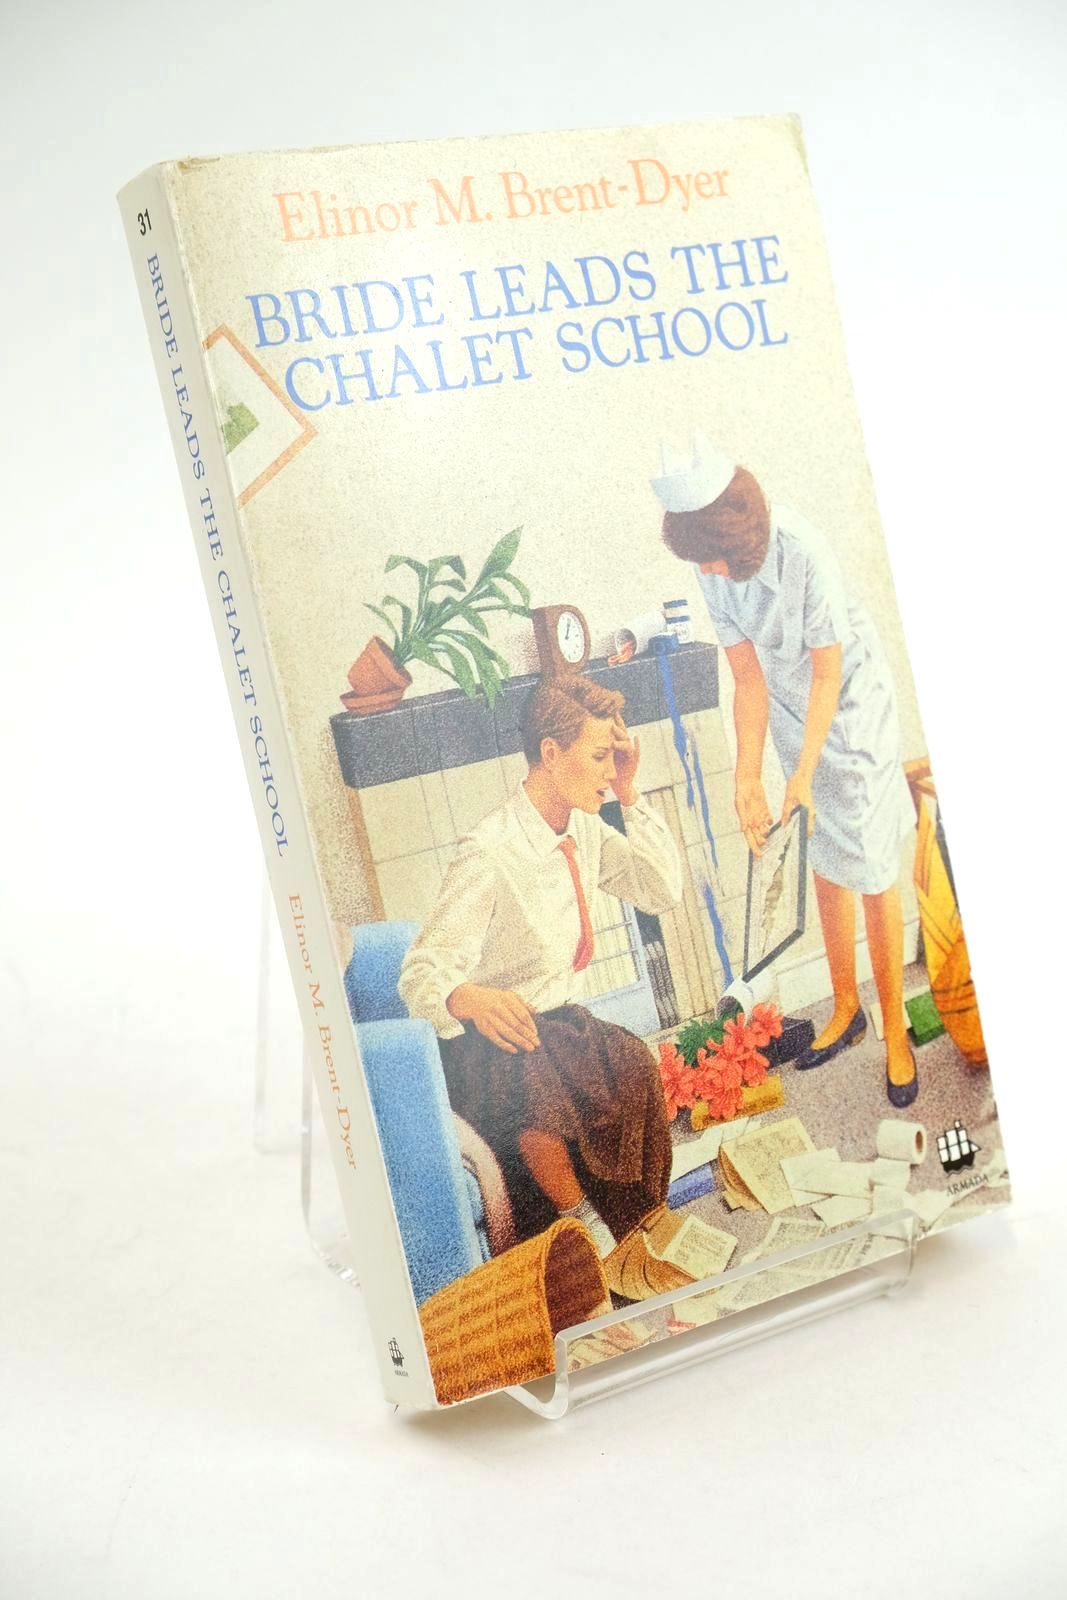 Photo of BRIDE LEADS THE CHALET SCHOOL written by Brent-Dyer, Elinor M. published by Armada (STOCK CODE: 1323975)  for sale by Stella & Rose's Books